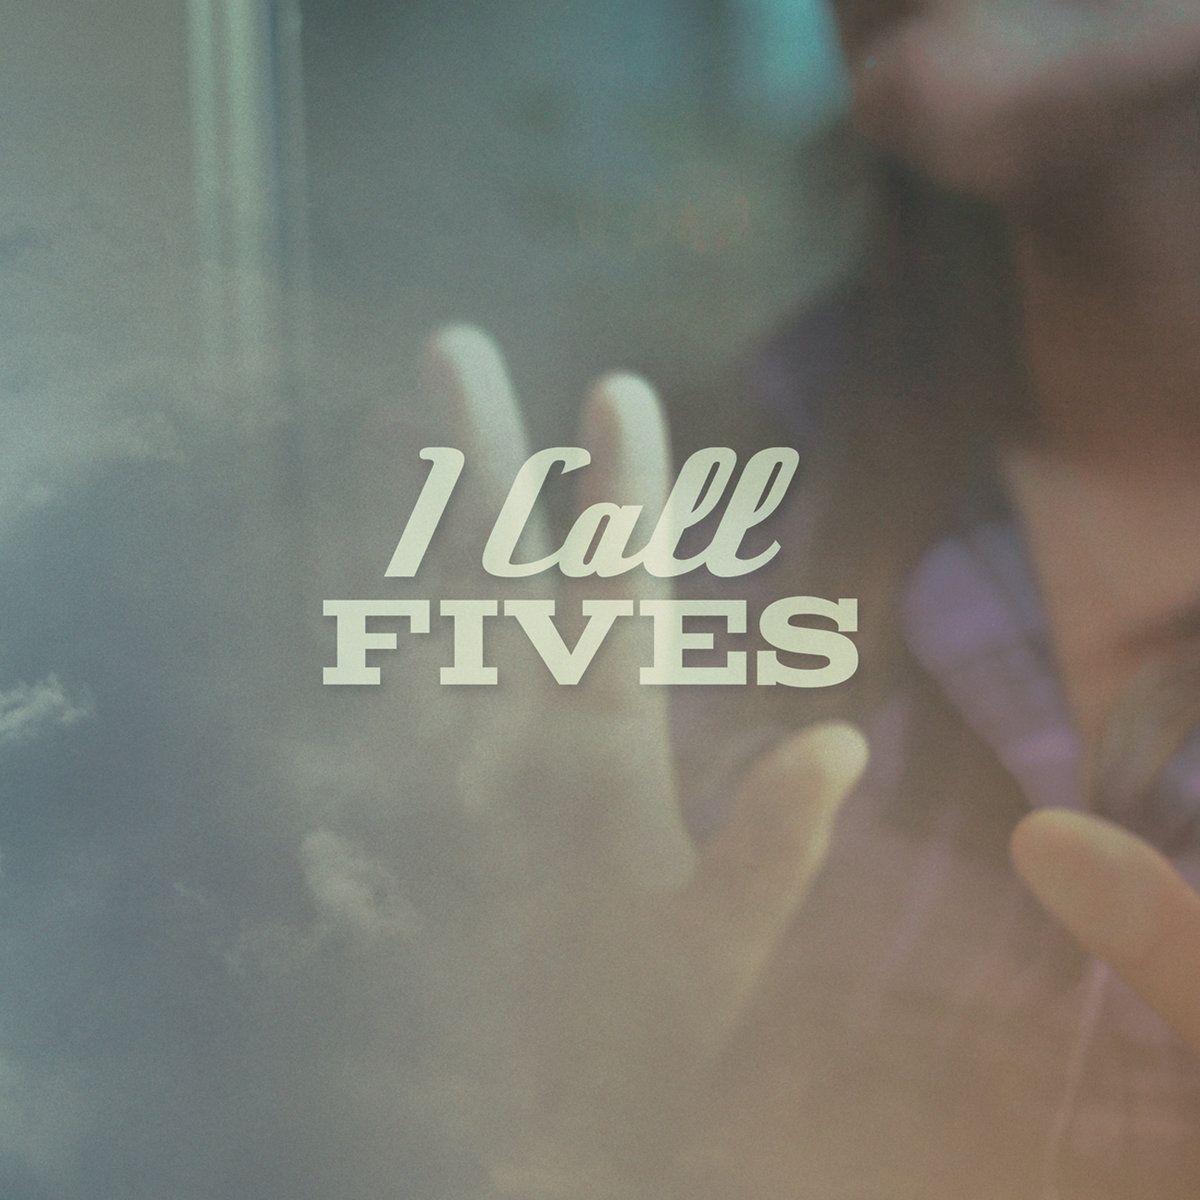 Five S Logo - I Call Fives. Pure Noise Records